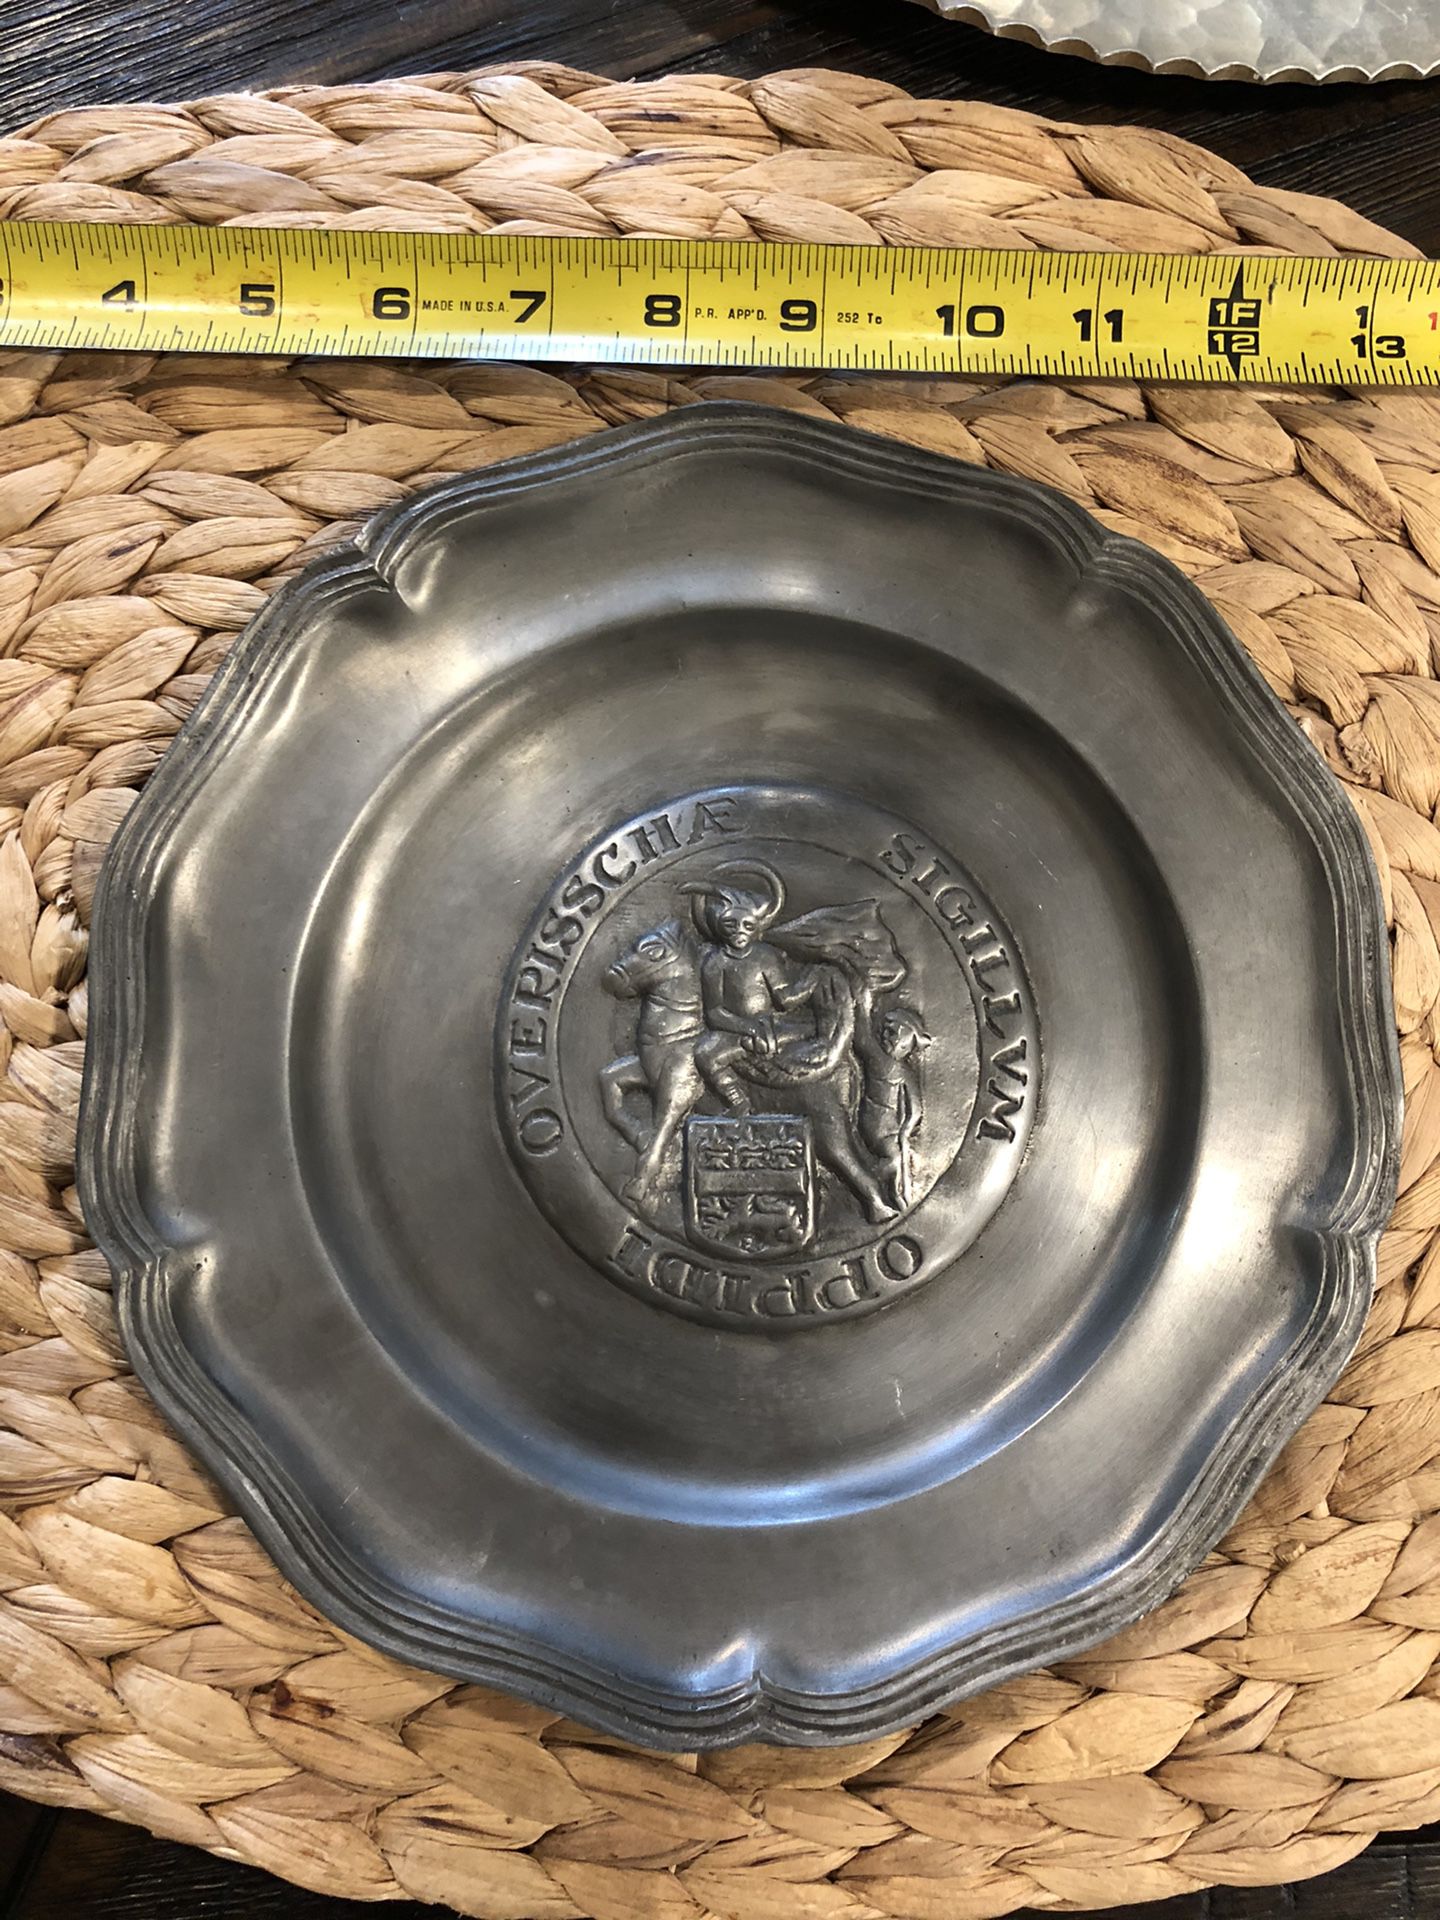 Vintage Pewter Plate Etain Pur with markings